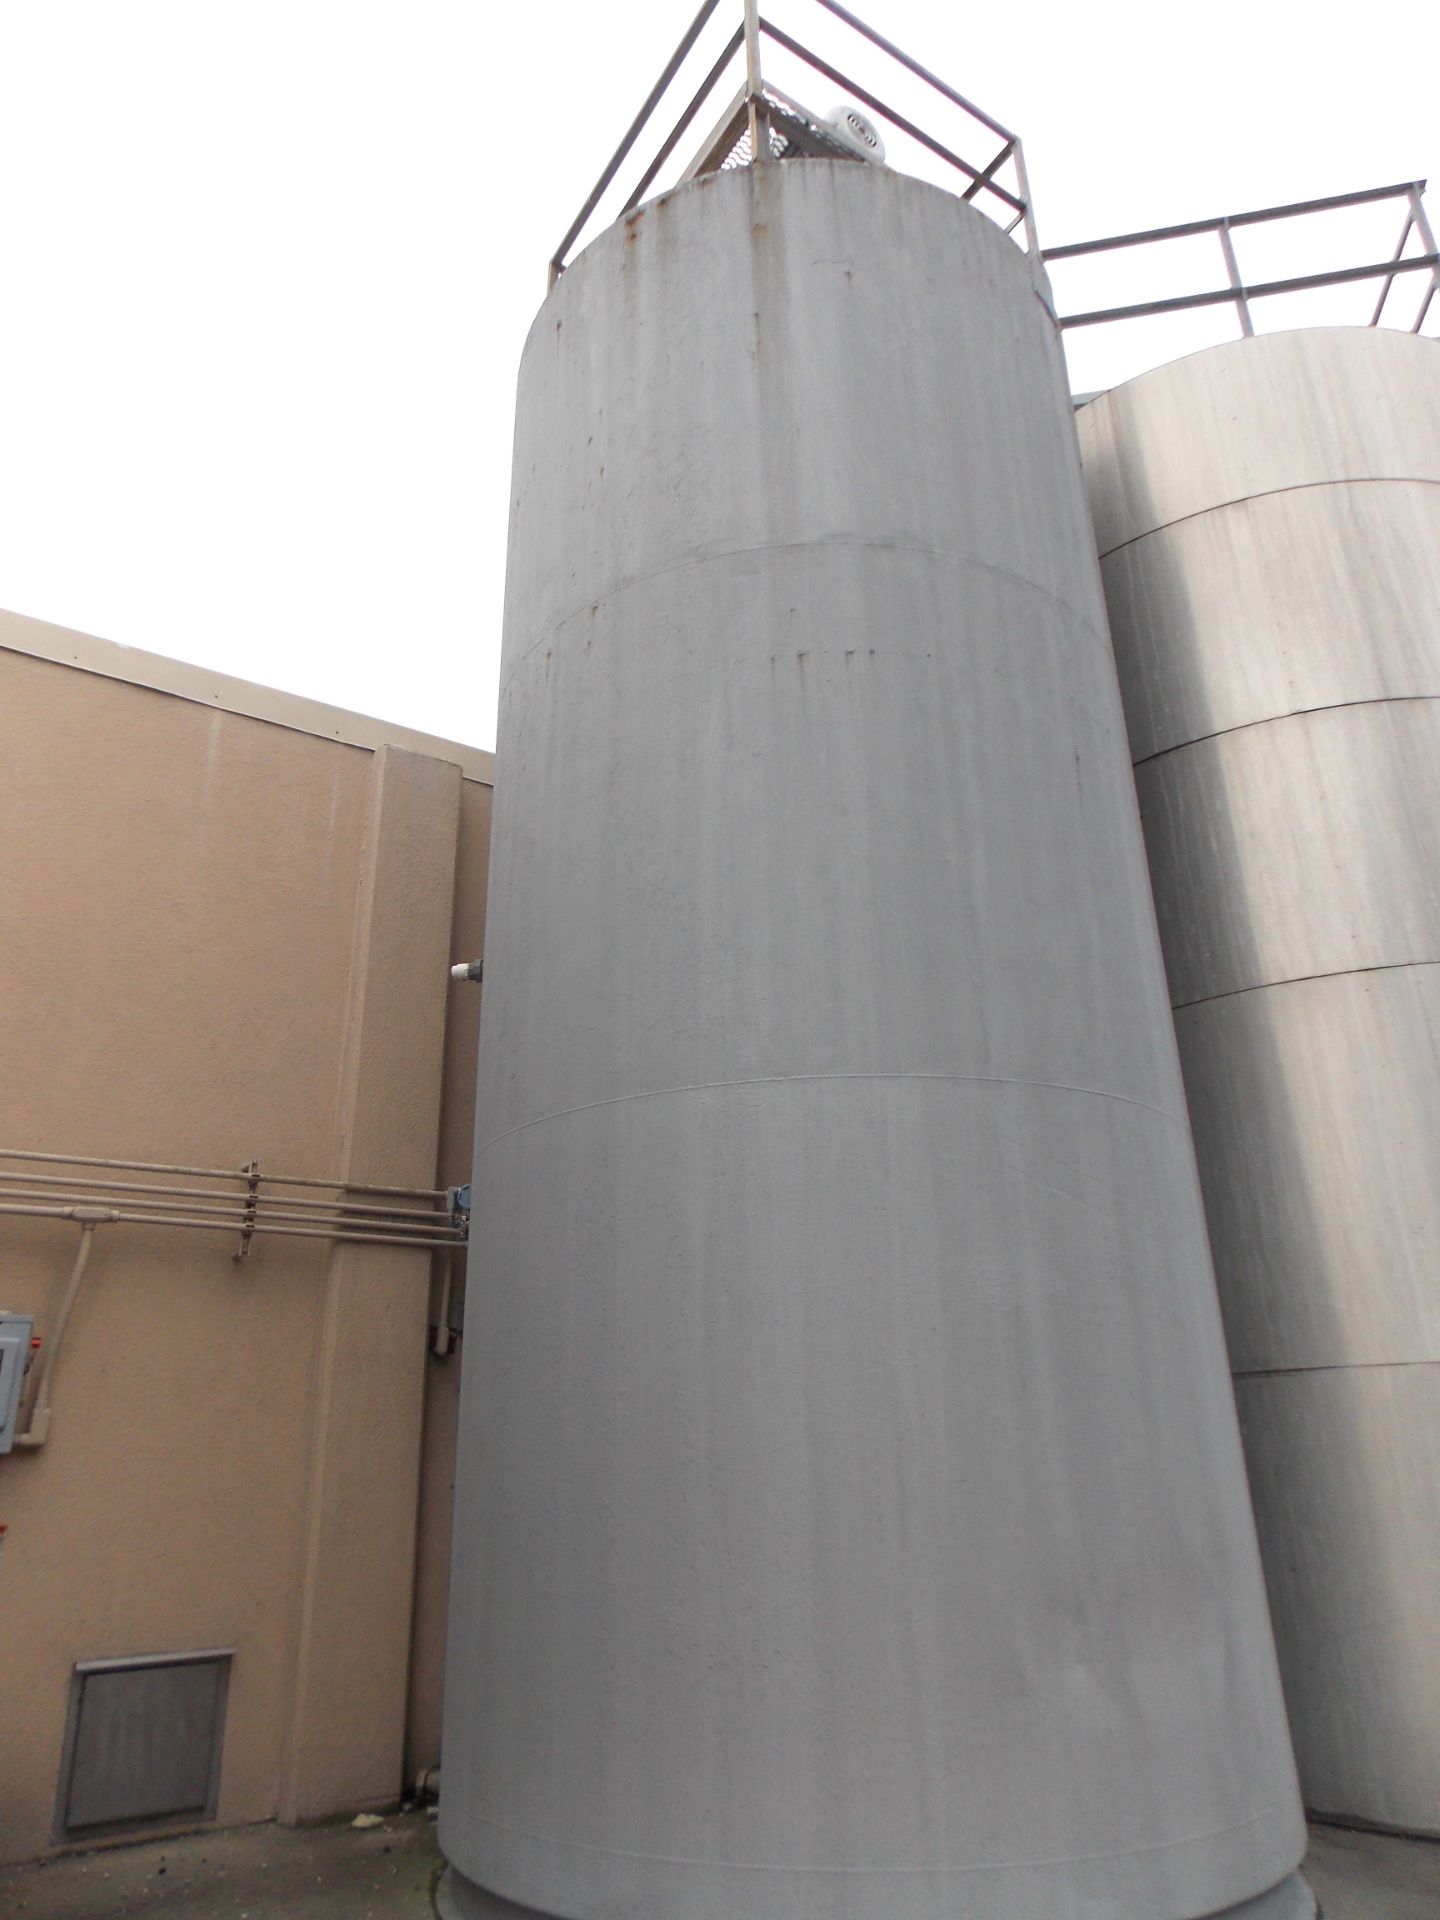 Dairy Craft 6,000 Gallon Stainless Vertical Silo with Agitator Serial: 77J3387Stainless Steel - Image 2 of 9